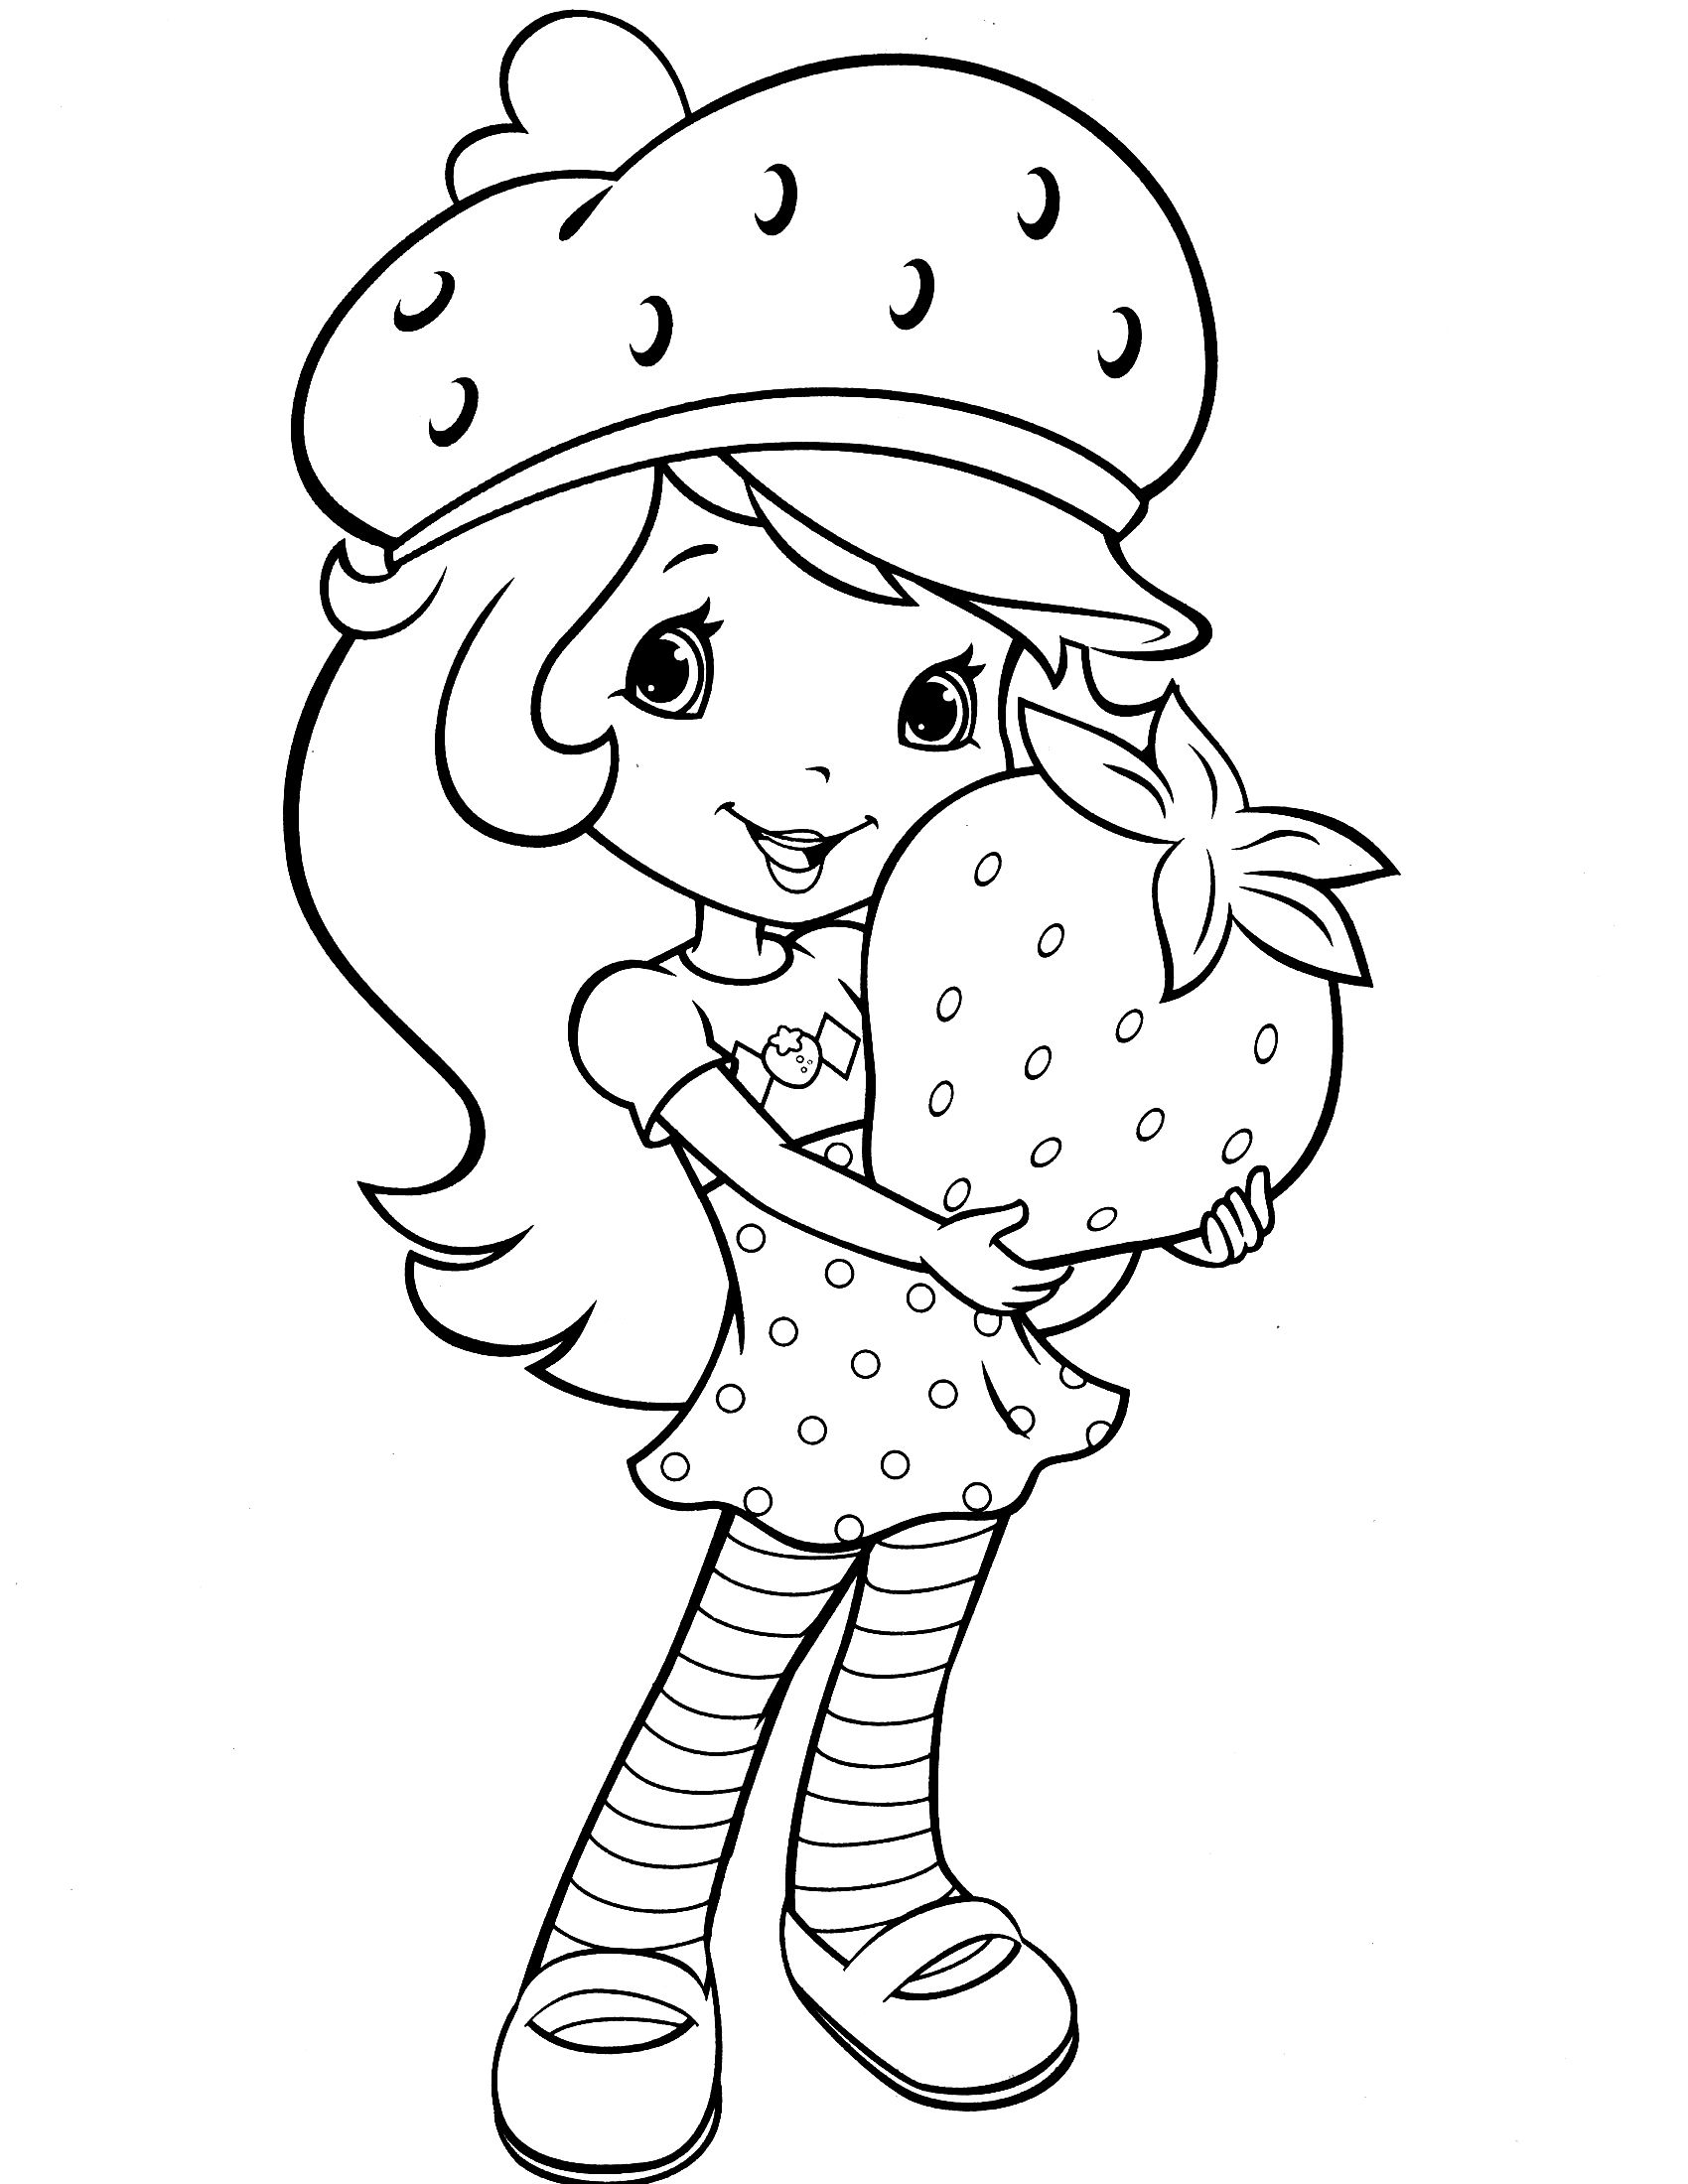 Strawberry Shortcake And All Friends Coloring Pages